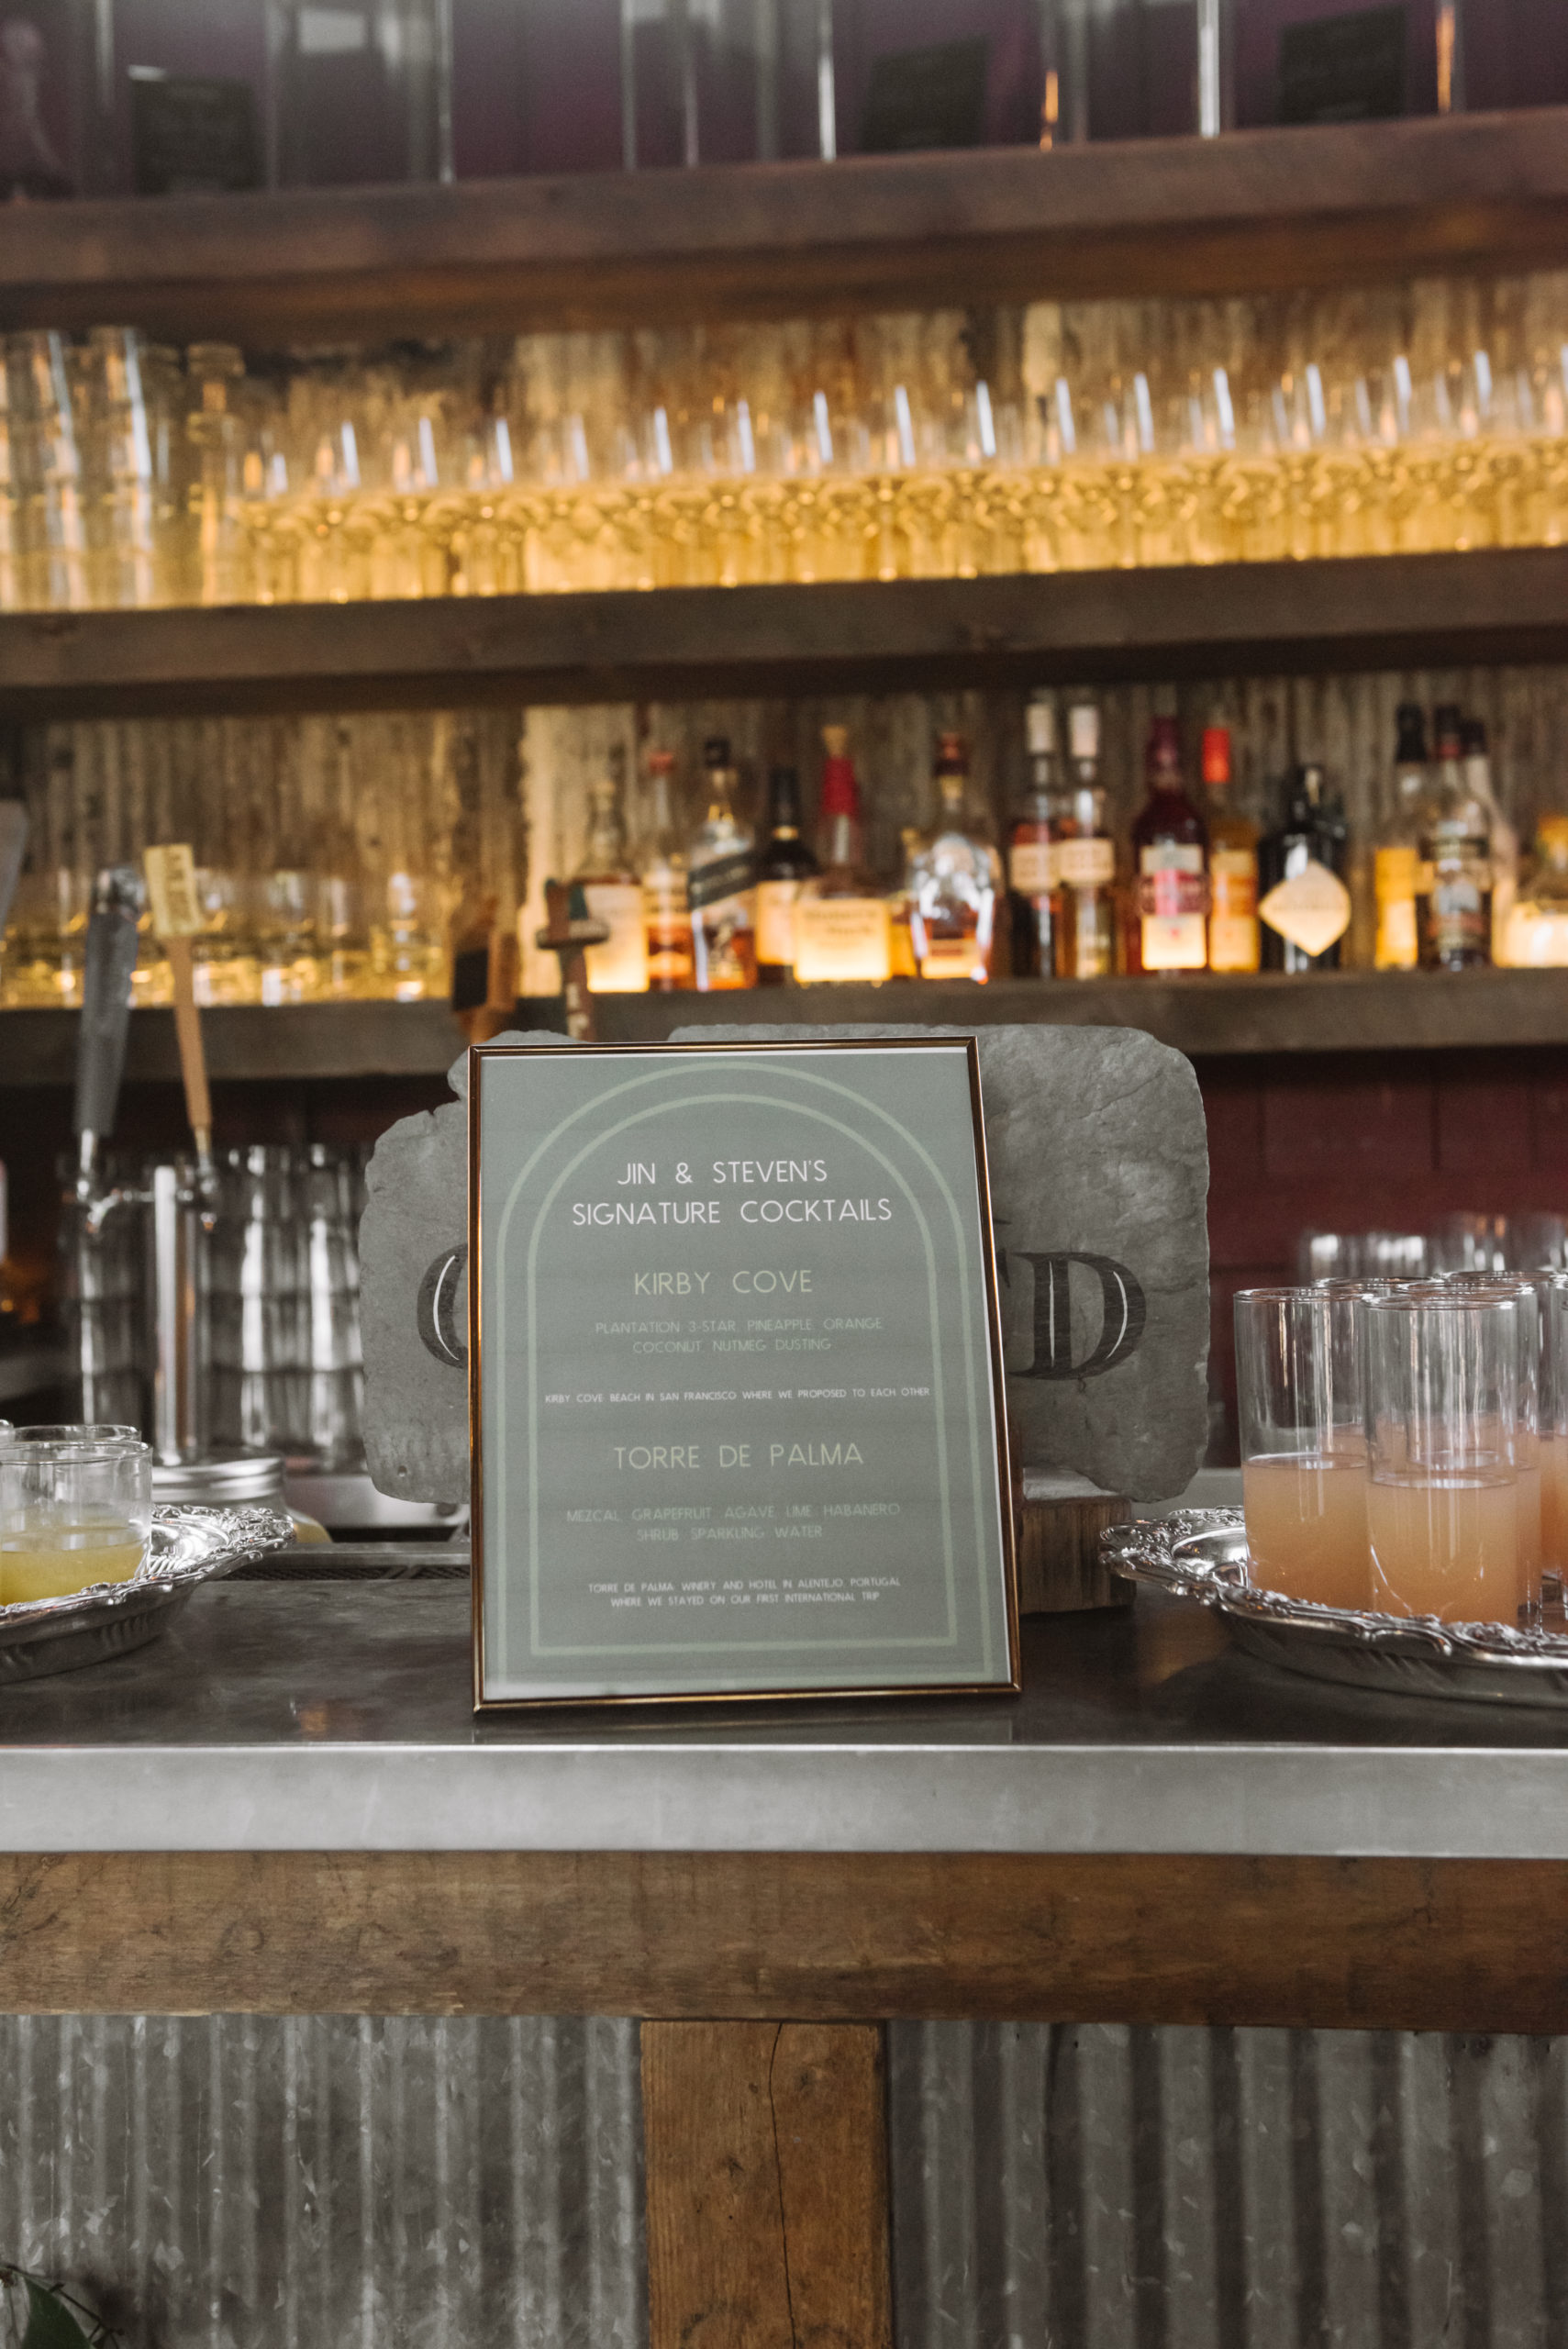 Detail of the groom's signature cocktail menu. It is set atop the bar counter and flanked by said signature cocktails. There are multiple wine glasses and various bottles of liquor on the shelves in the background. The two signature cocktails are called "Kirby Cove" and "Torre de Palma".